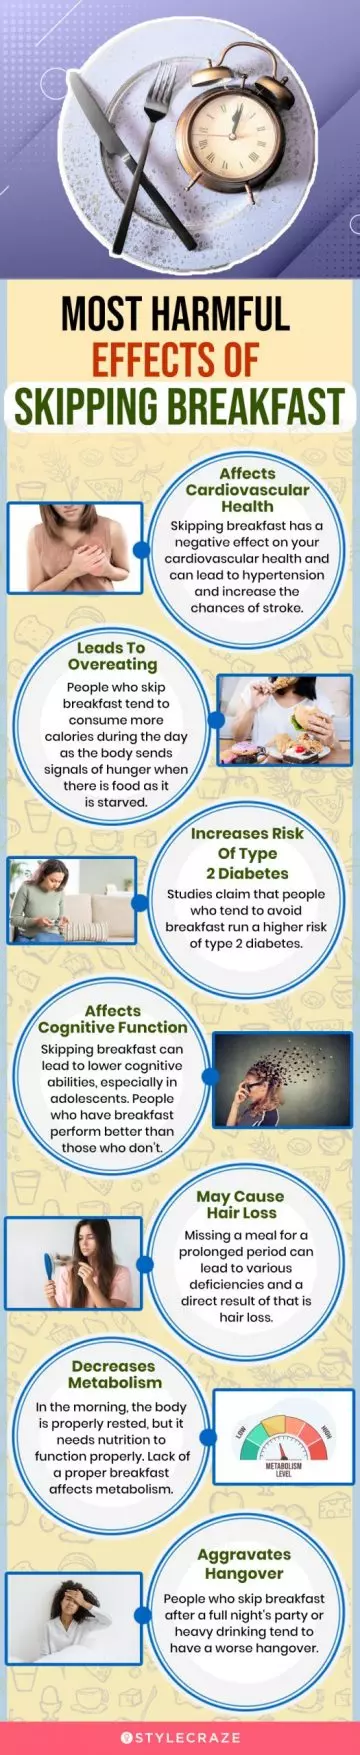 most harmful effects of skipping breakfast (infographic)